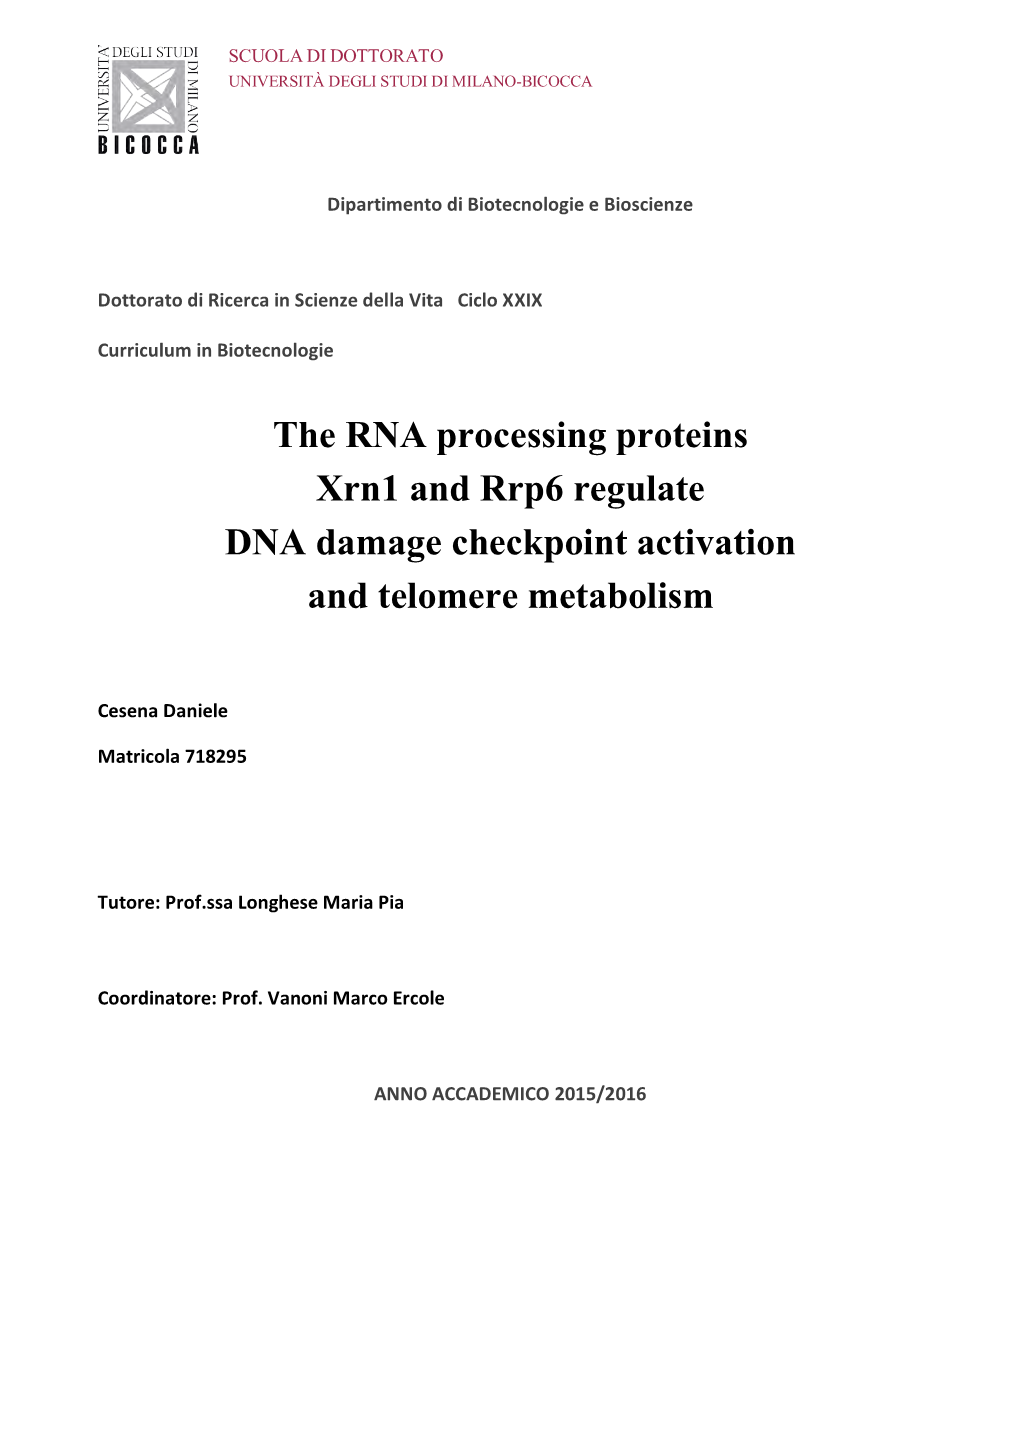 The RNA Processing Proteins Xrn1 and Rrp6 Regulate DNA Damage Checkpoint Activation and Telomere Metabolism